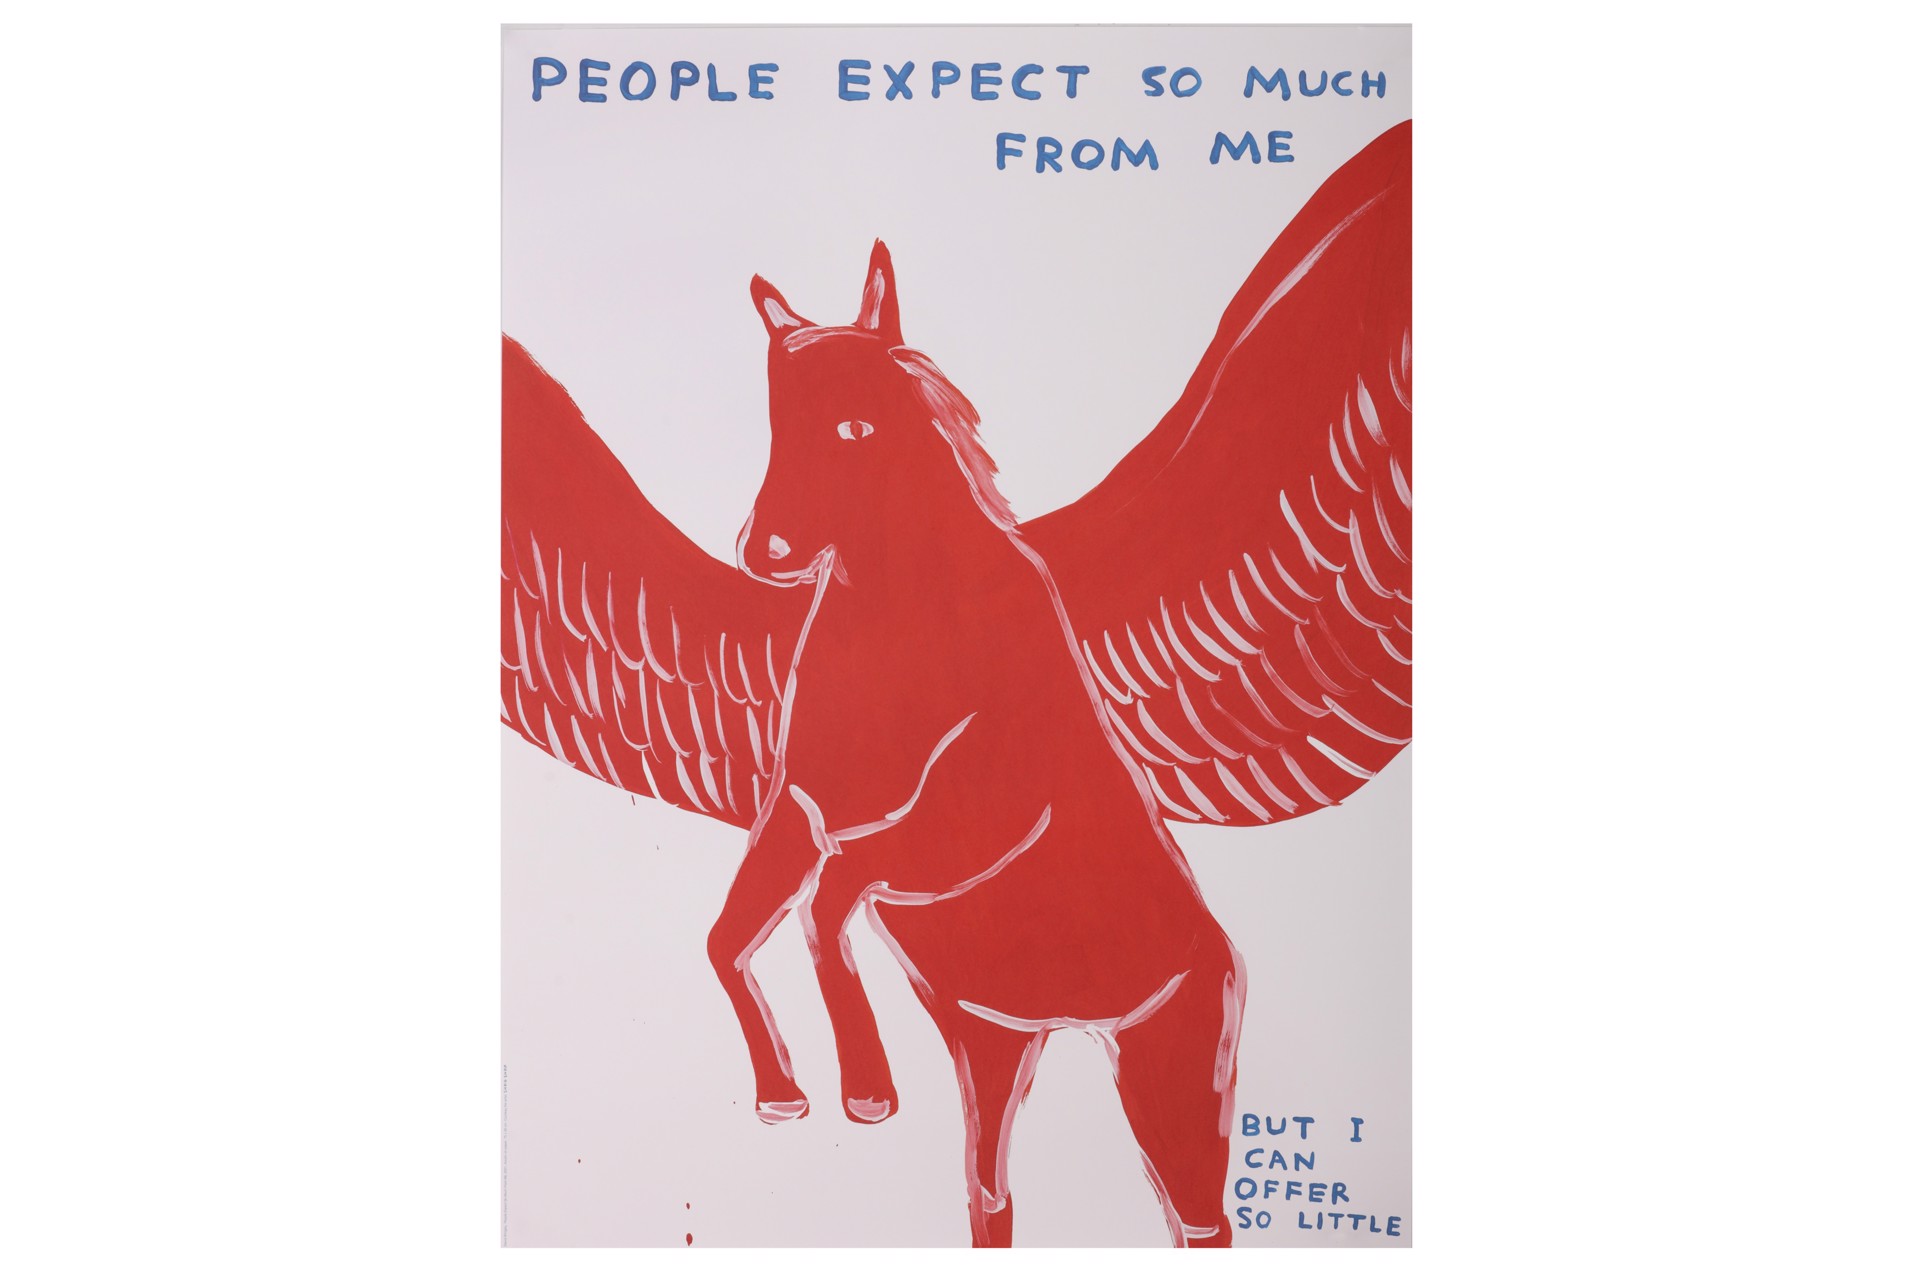 People Expect So Much From Me by David Shrigley